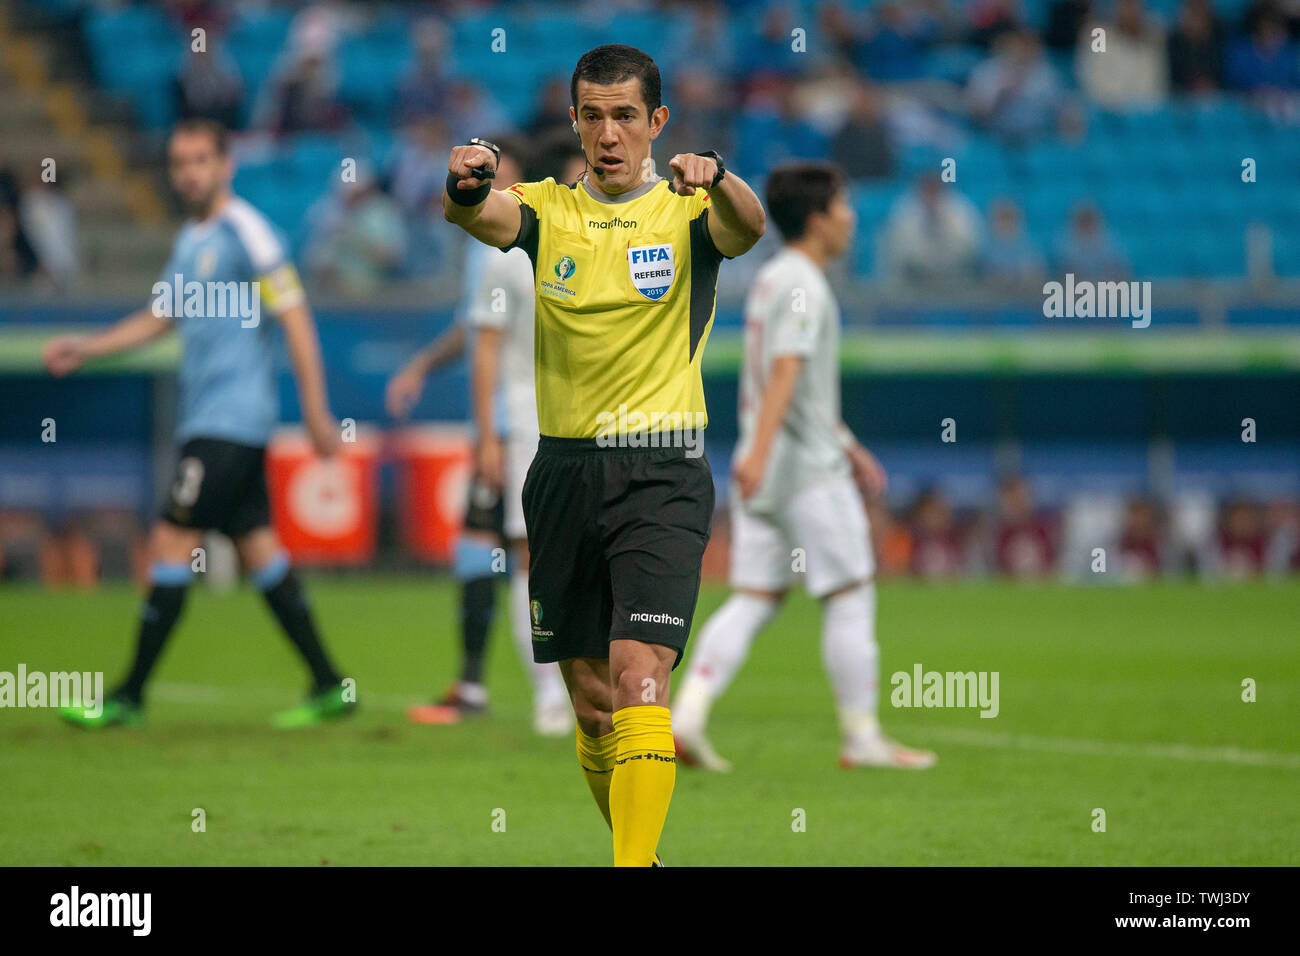 Porto Alegre, Brazil. 20th June, 2019. Arbitration of the Colombian trio Andres Rojas, assisted by Alexander Guzmán and Wilmar Navarro during a match between Uruguay and Japan, valid for the group stage of the Copa América 2019, held this Thursday (20) at the Arena of Grêmio in Porto Alegre, RS. Credit: Raul Pereira/FotoArena/Alamy Live News Stock Photo